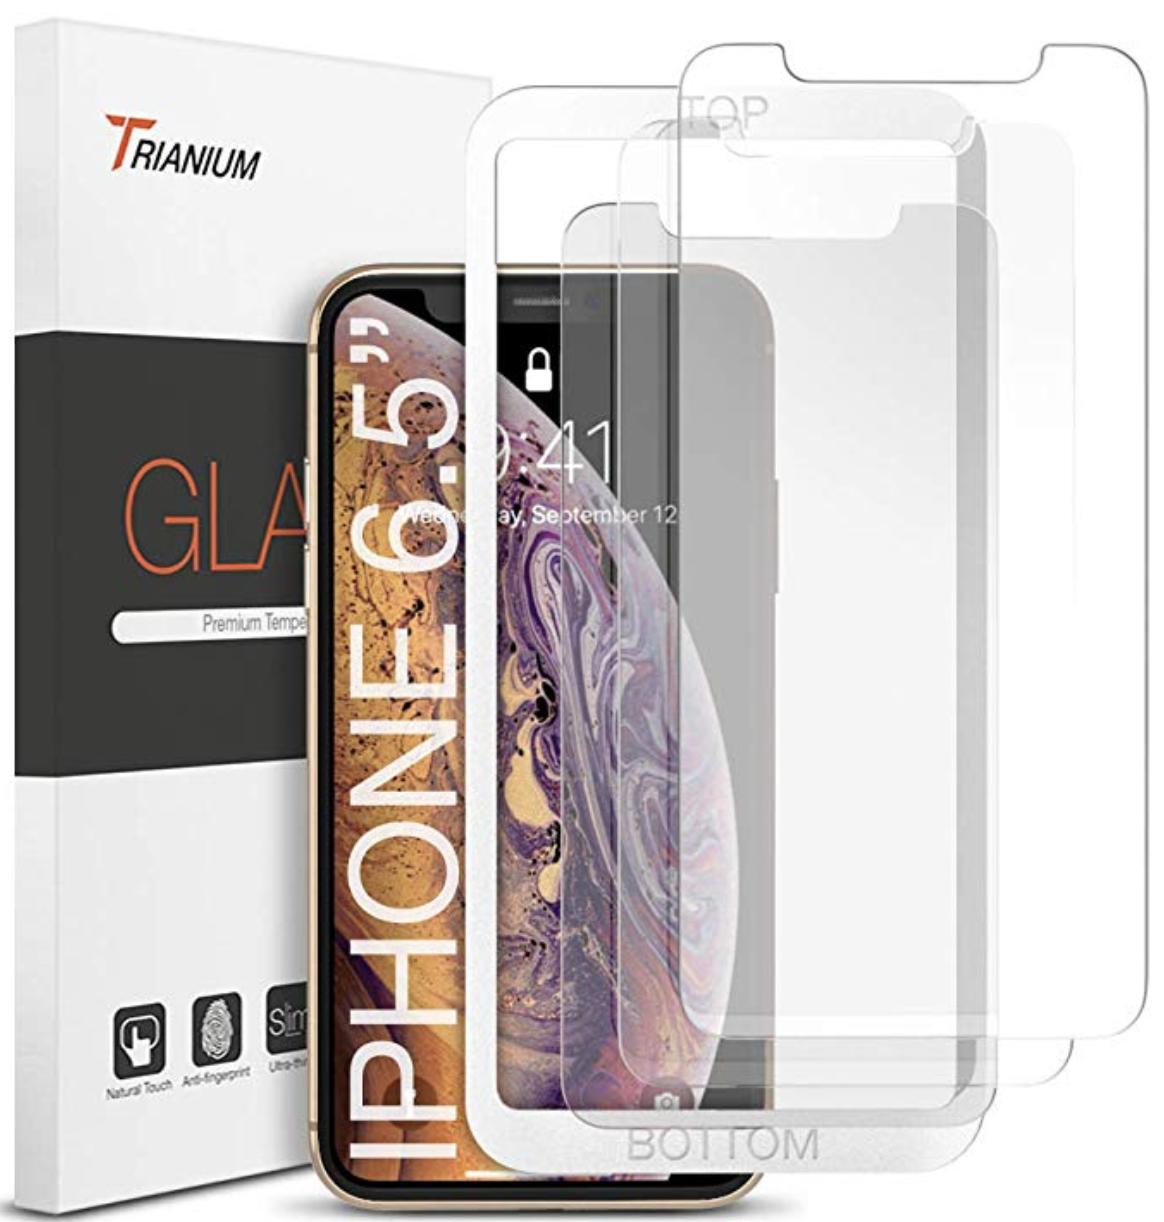 XDesign Glass Screen Protector for iPhone 11 Pro Max